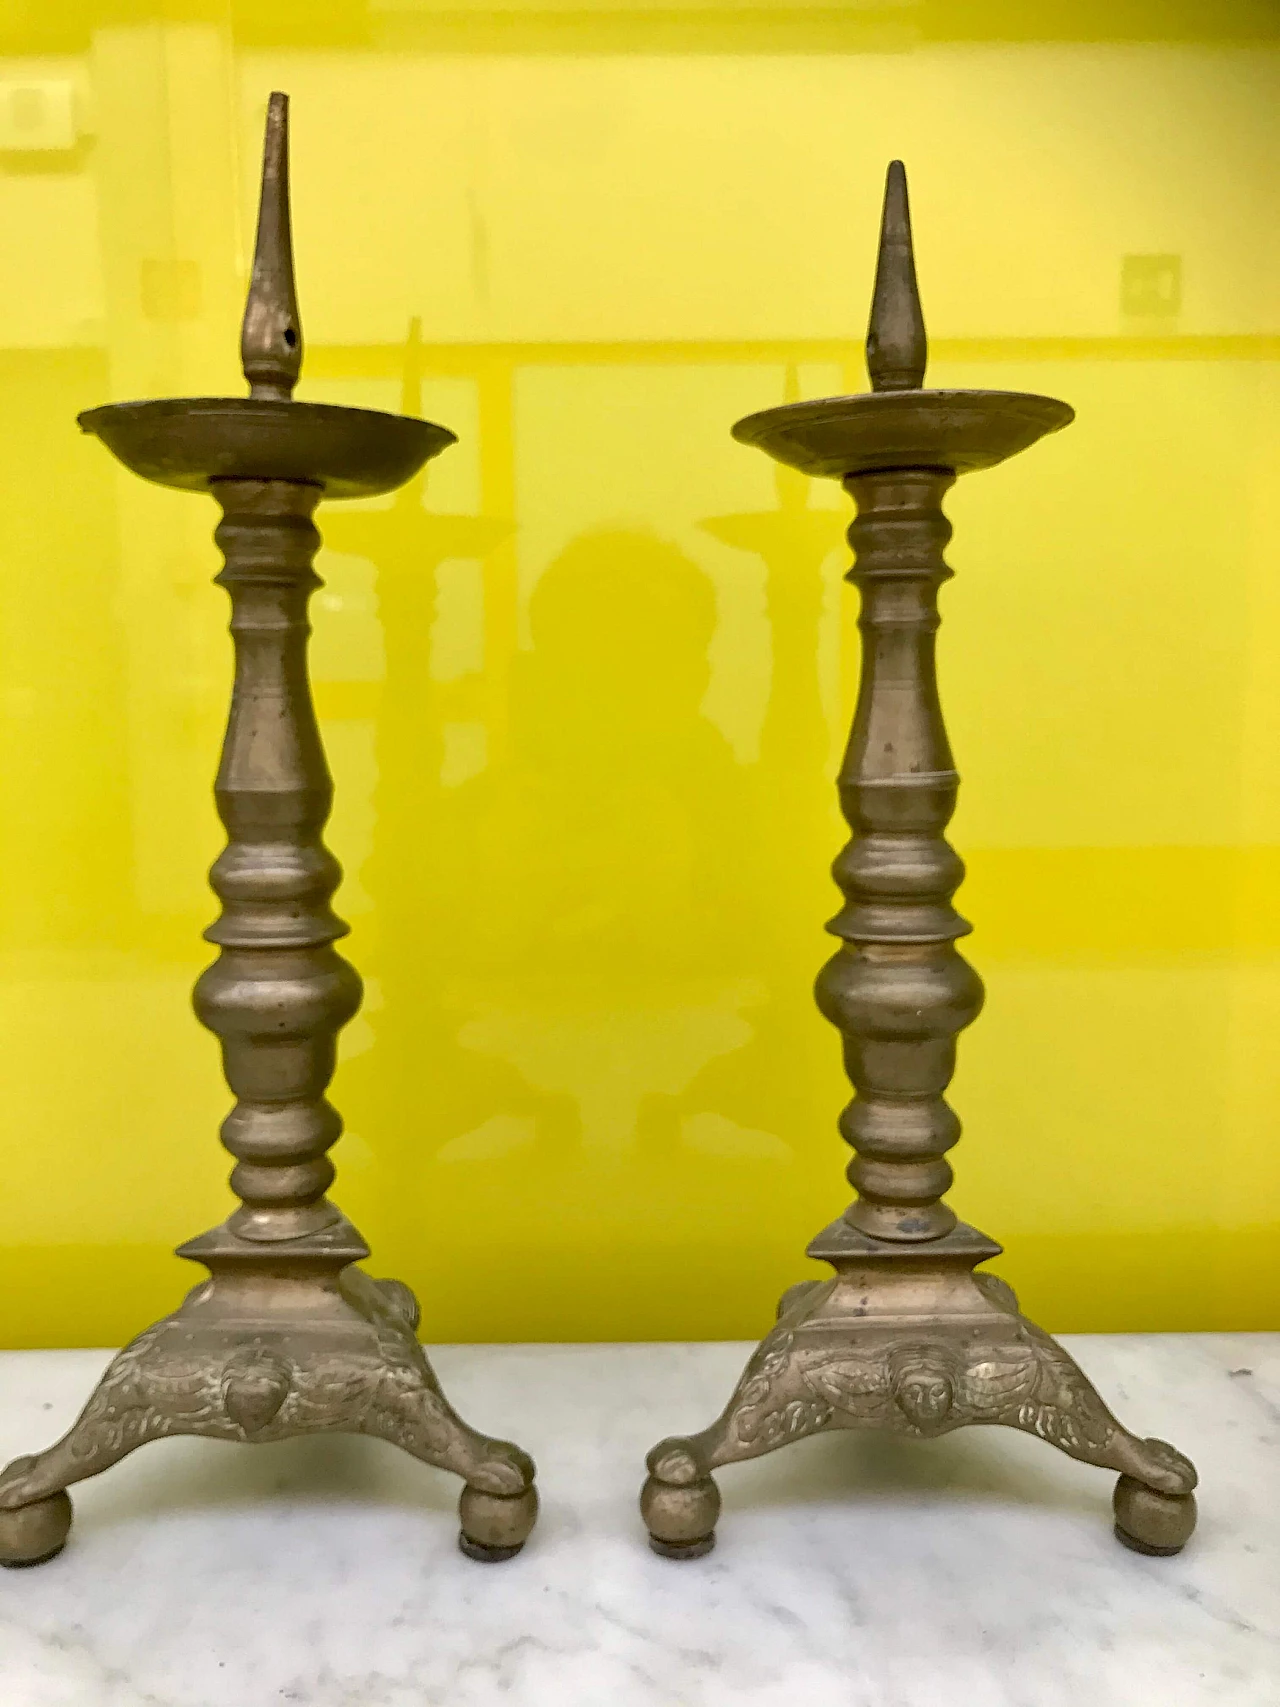 Pair of Italian candlesticks or torch holders in bronze, 17th century 1167798